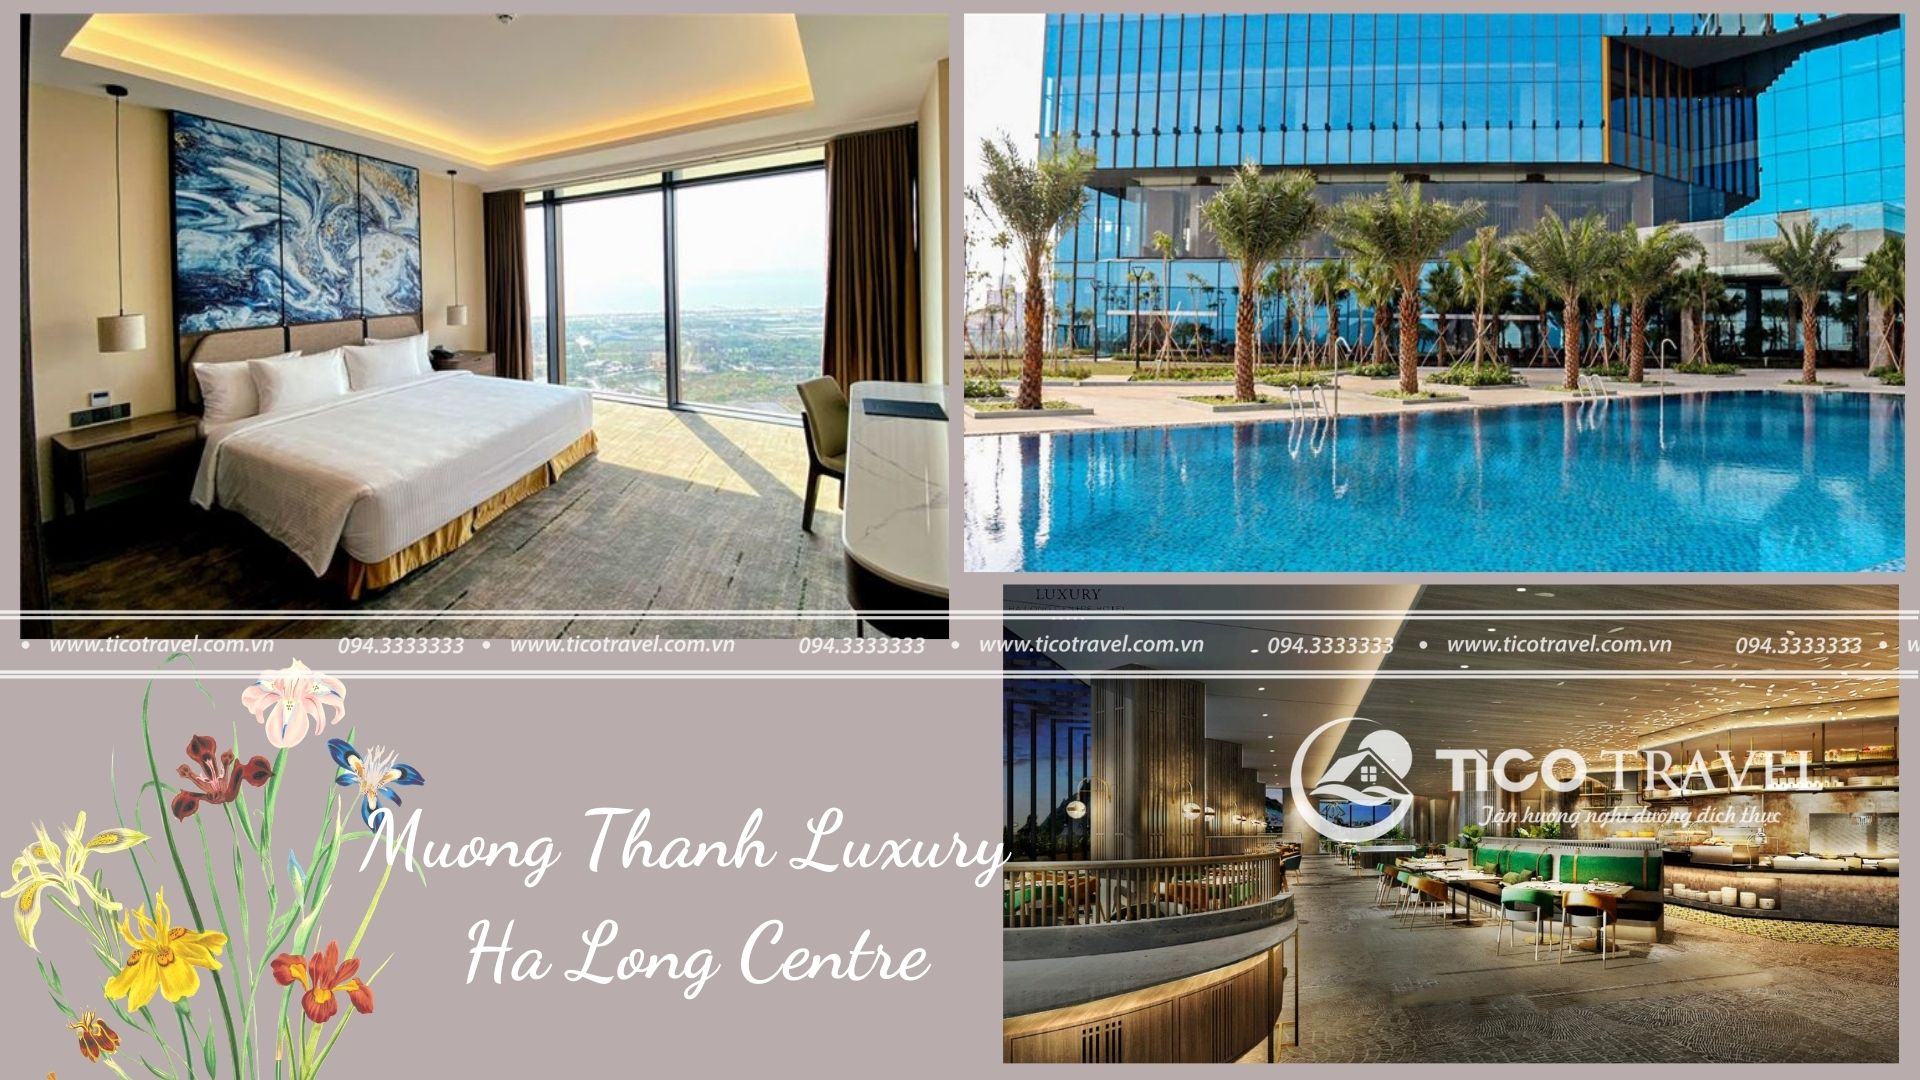 Muong Thanh Luxury Ha Long Centre